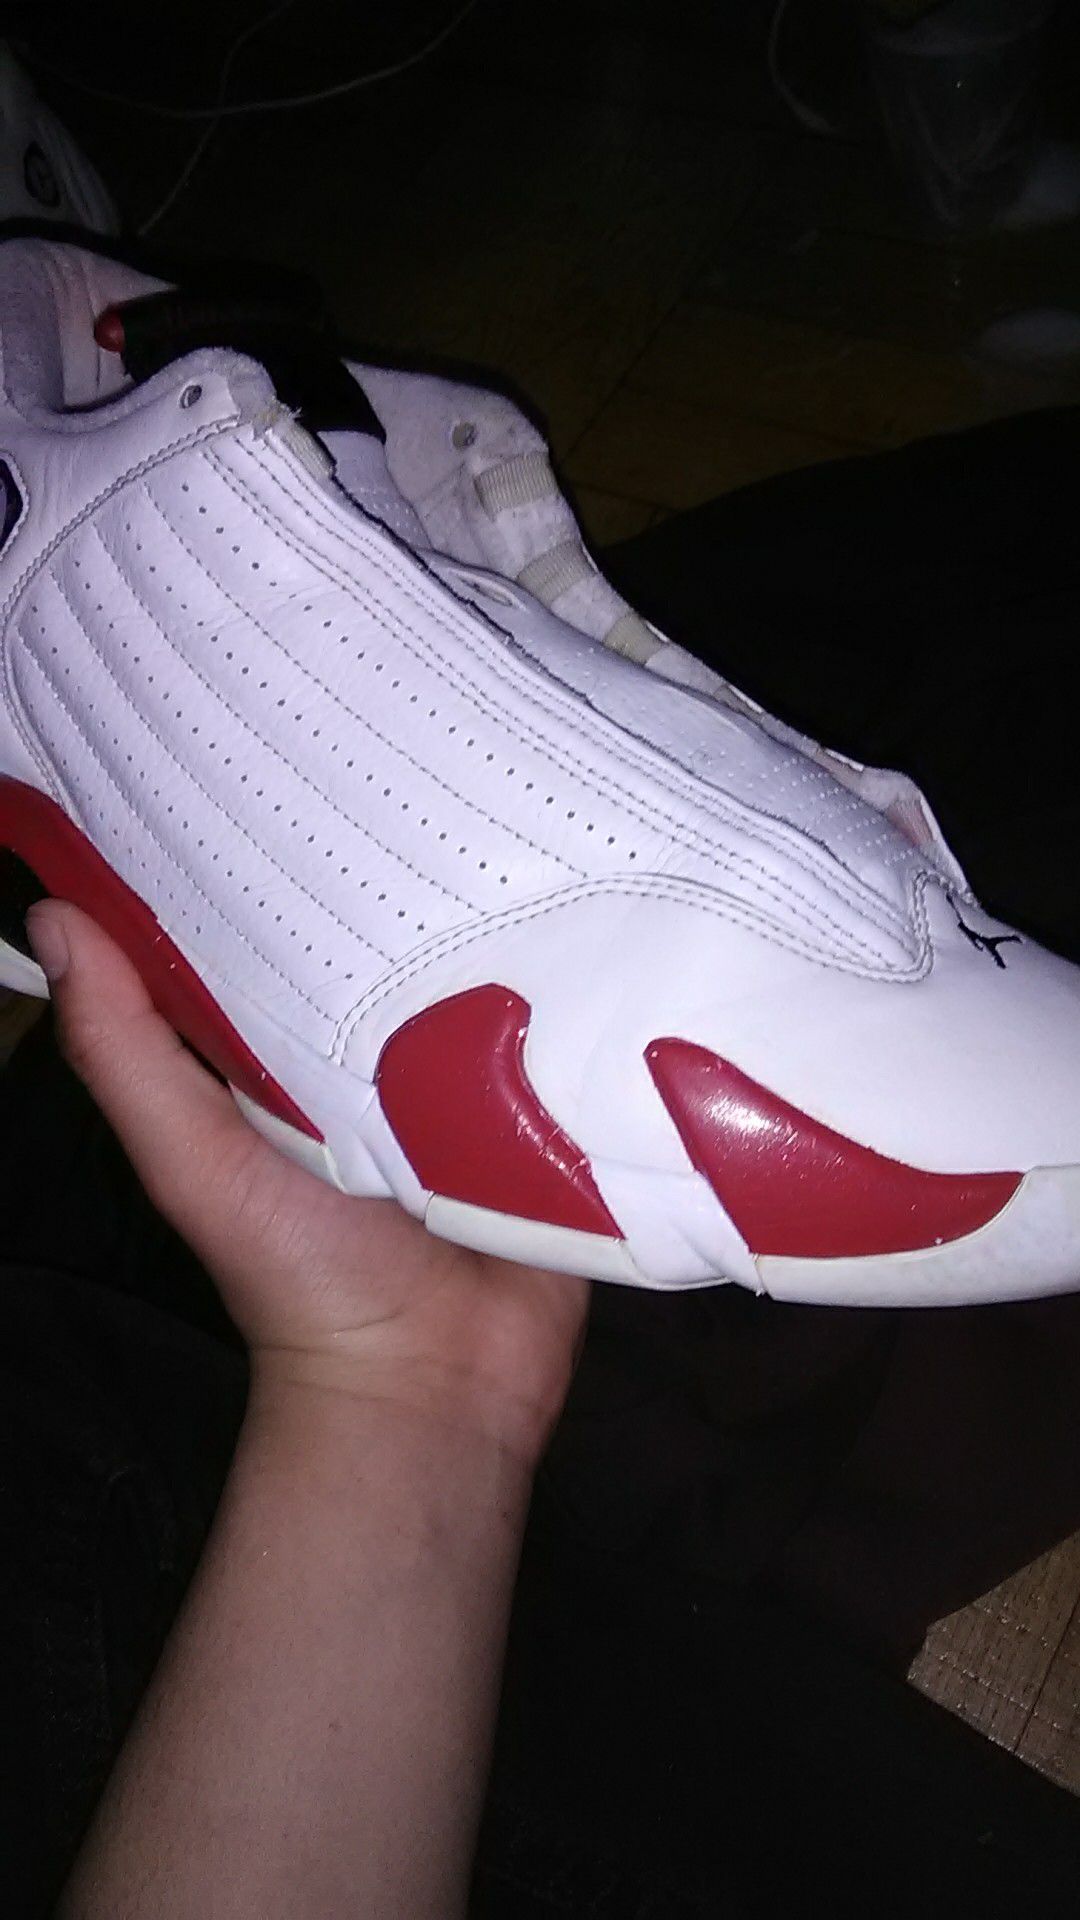 Candy Cane 14s size 14 (2005)